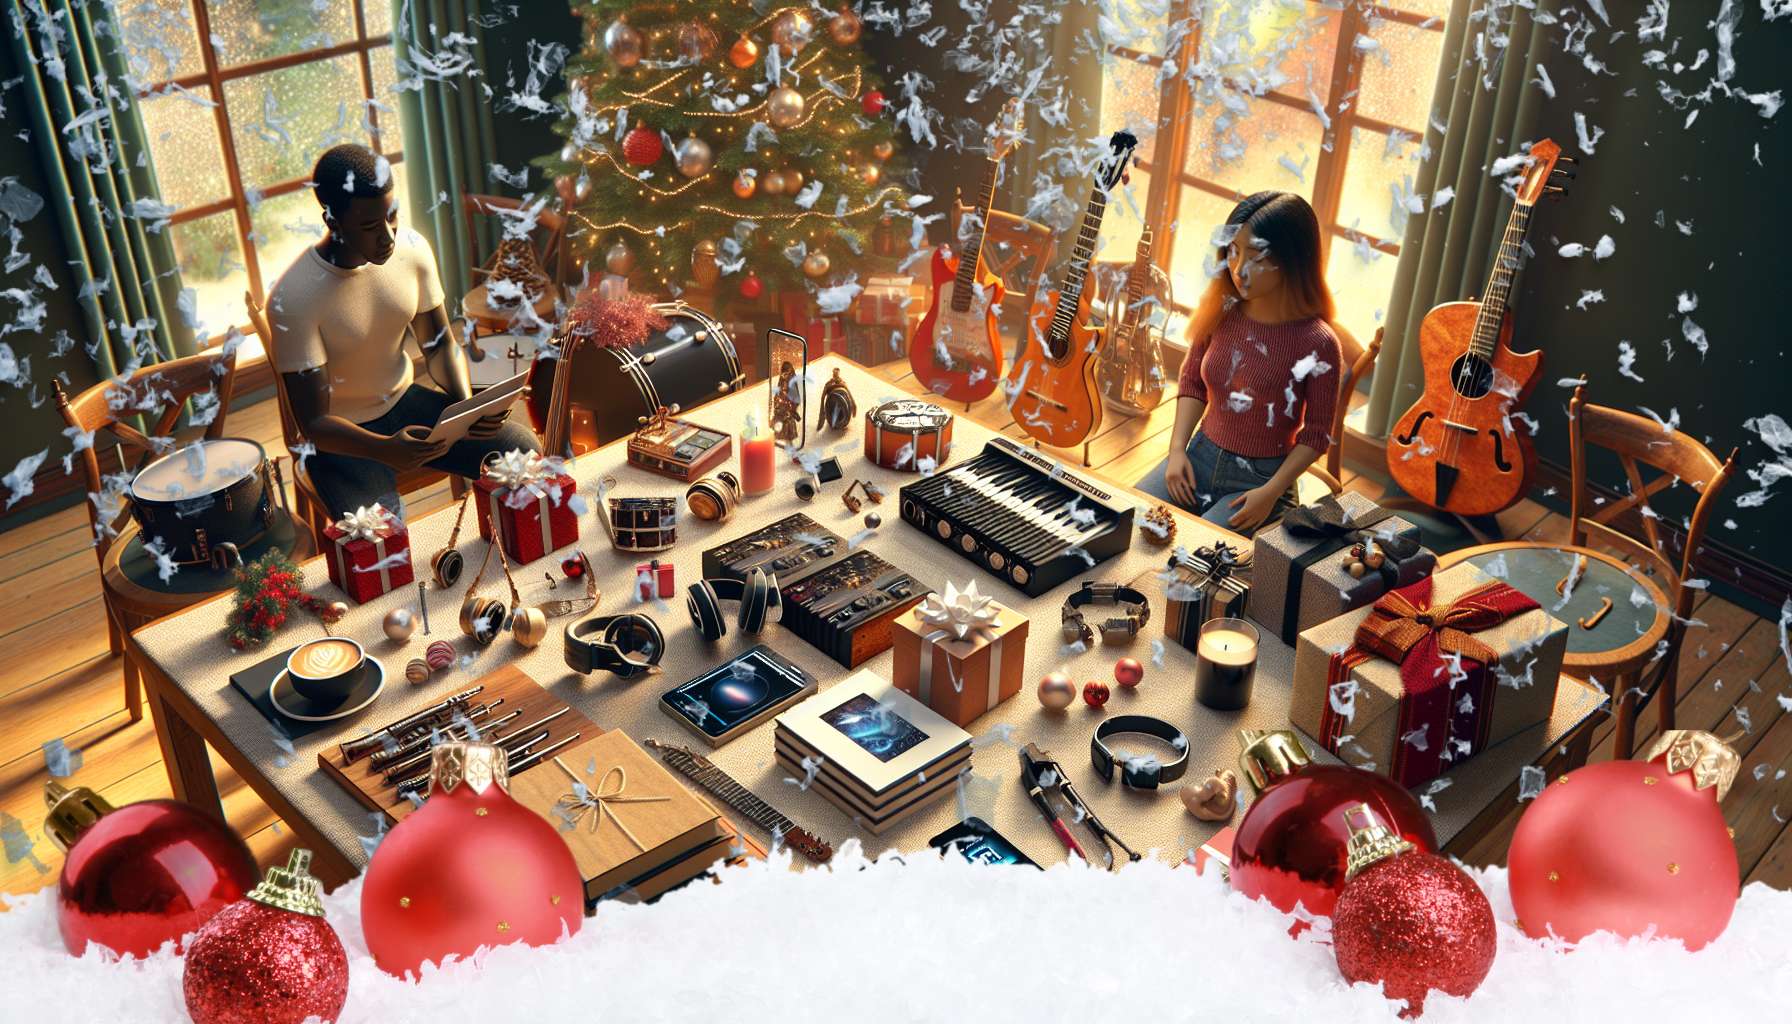 a musician couple sitting around looking at tons of musical instruments and gifts for Christmas on the table